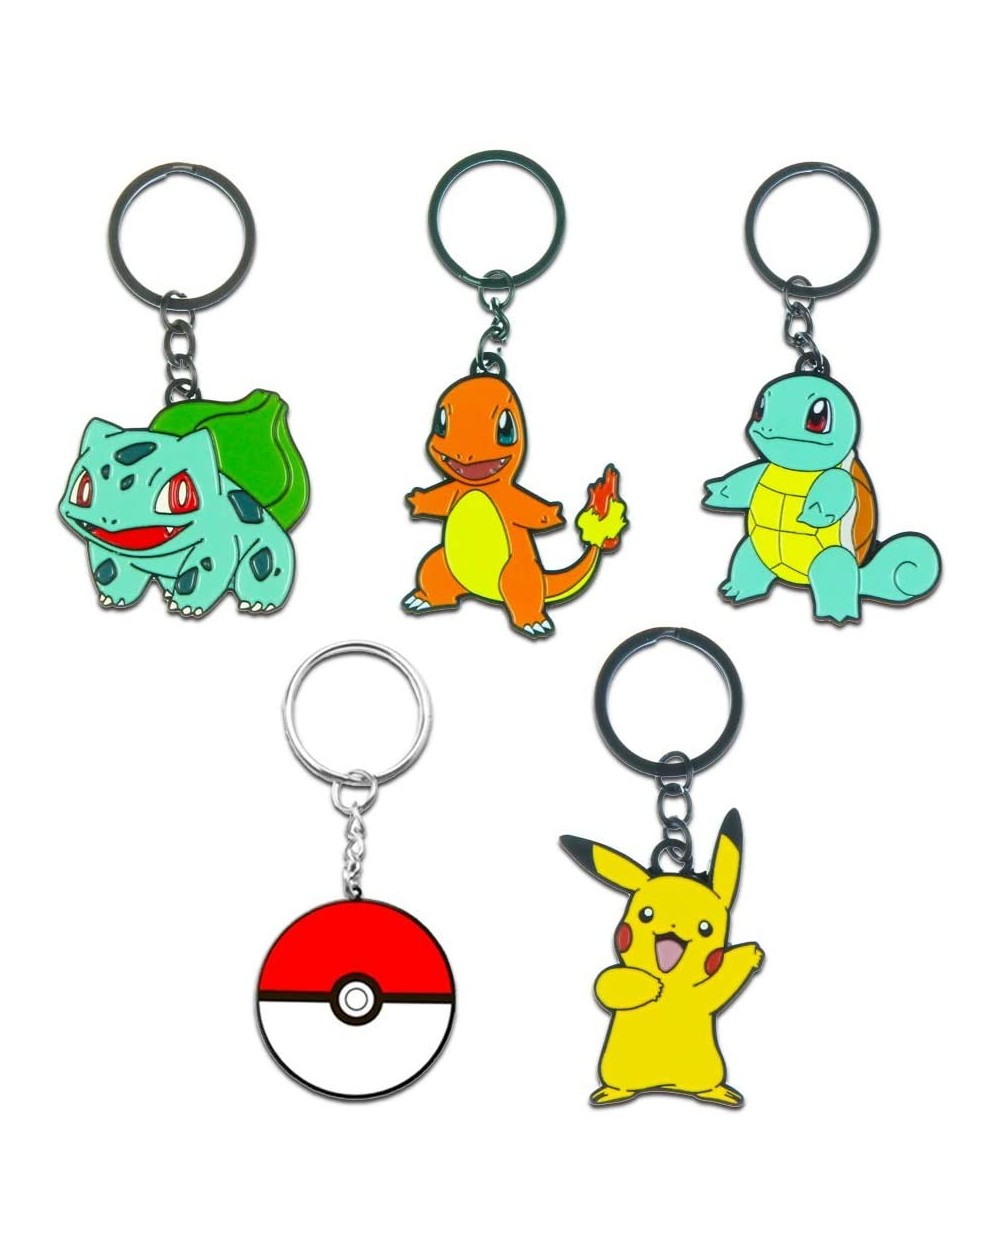 Party Favors Pokemon Keychain Party Favors Pack ~ Bundle Includes 6 Metal Key Rings Featuring Pikachu and More - C318QSMQNR6 ...